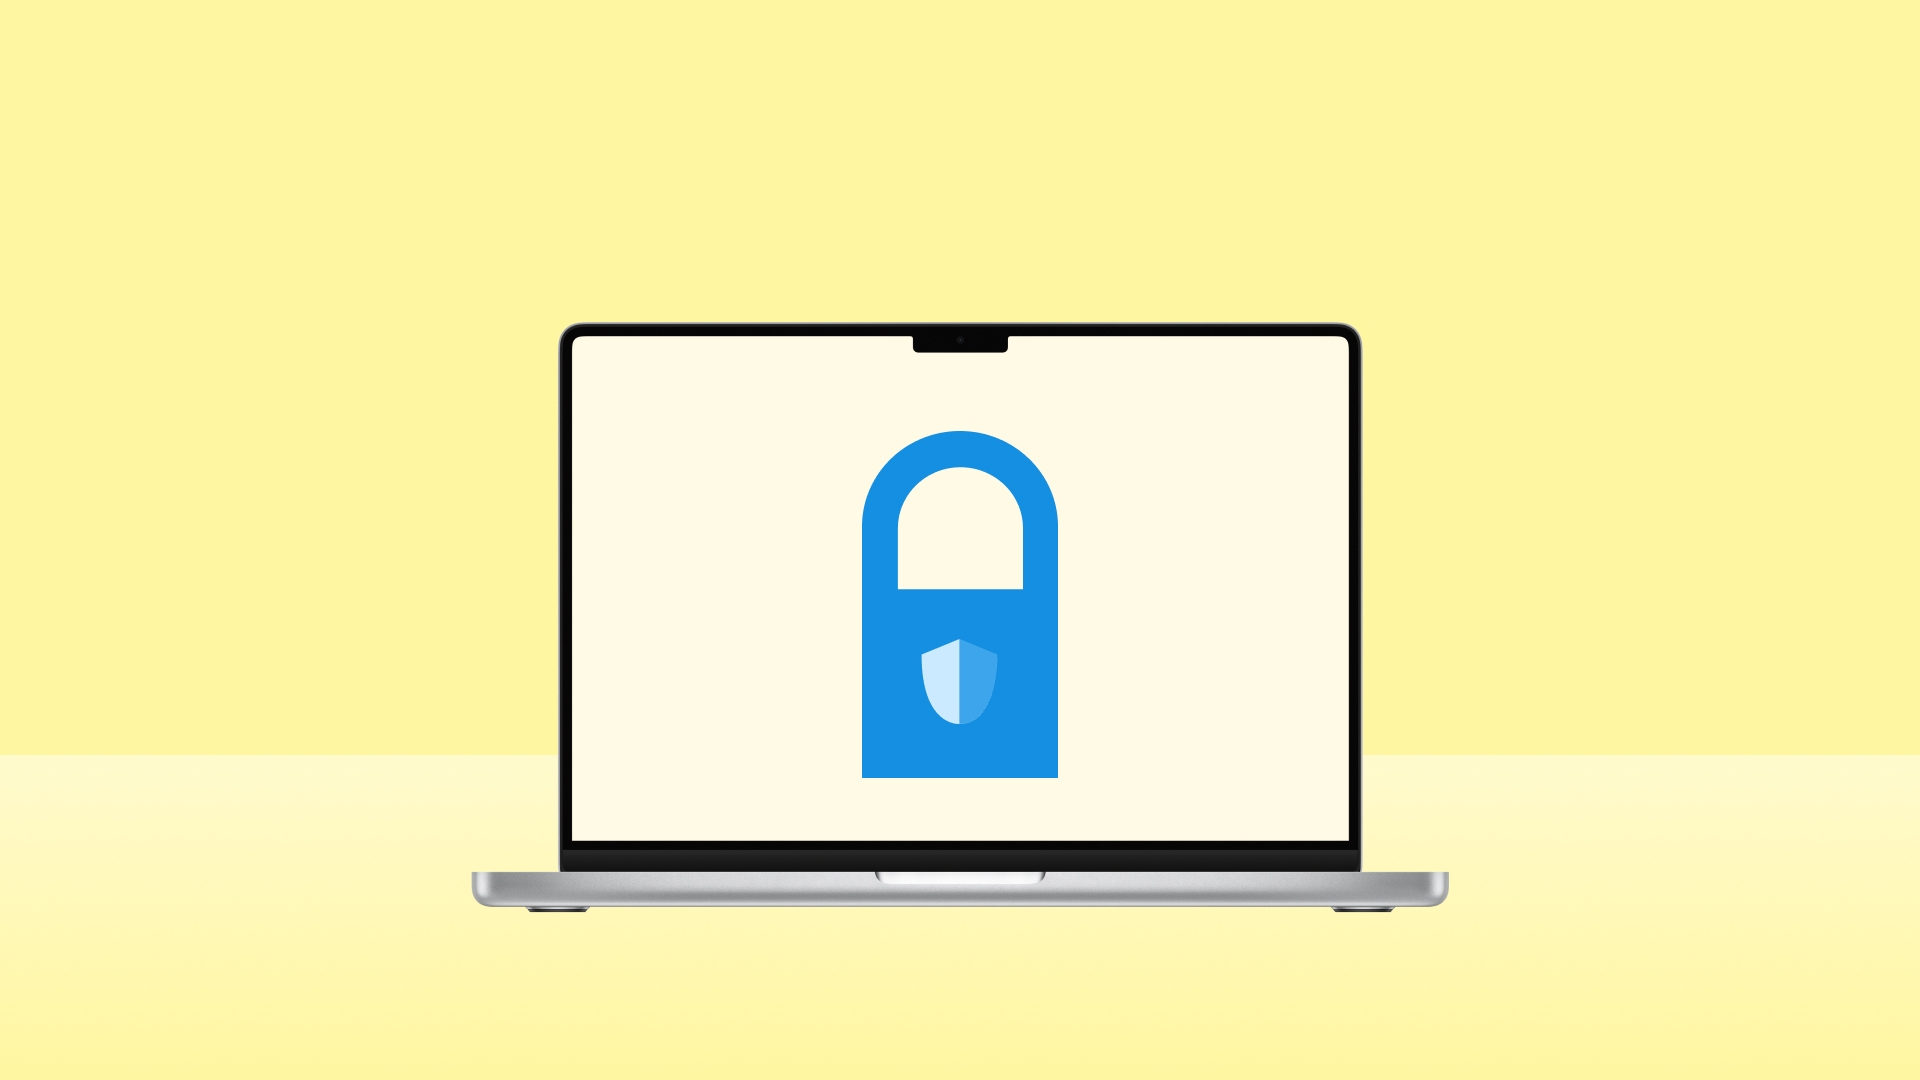 Illustration of a blue laptop on a yellow background, with a padlock lock on the screen.